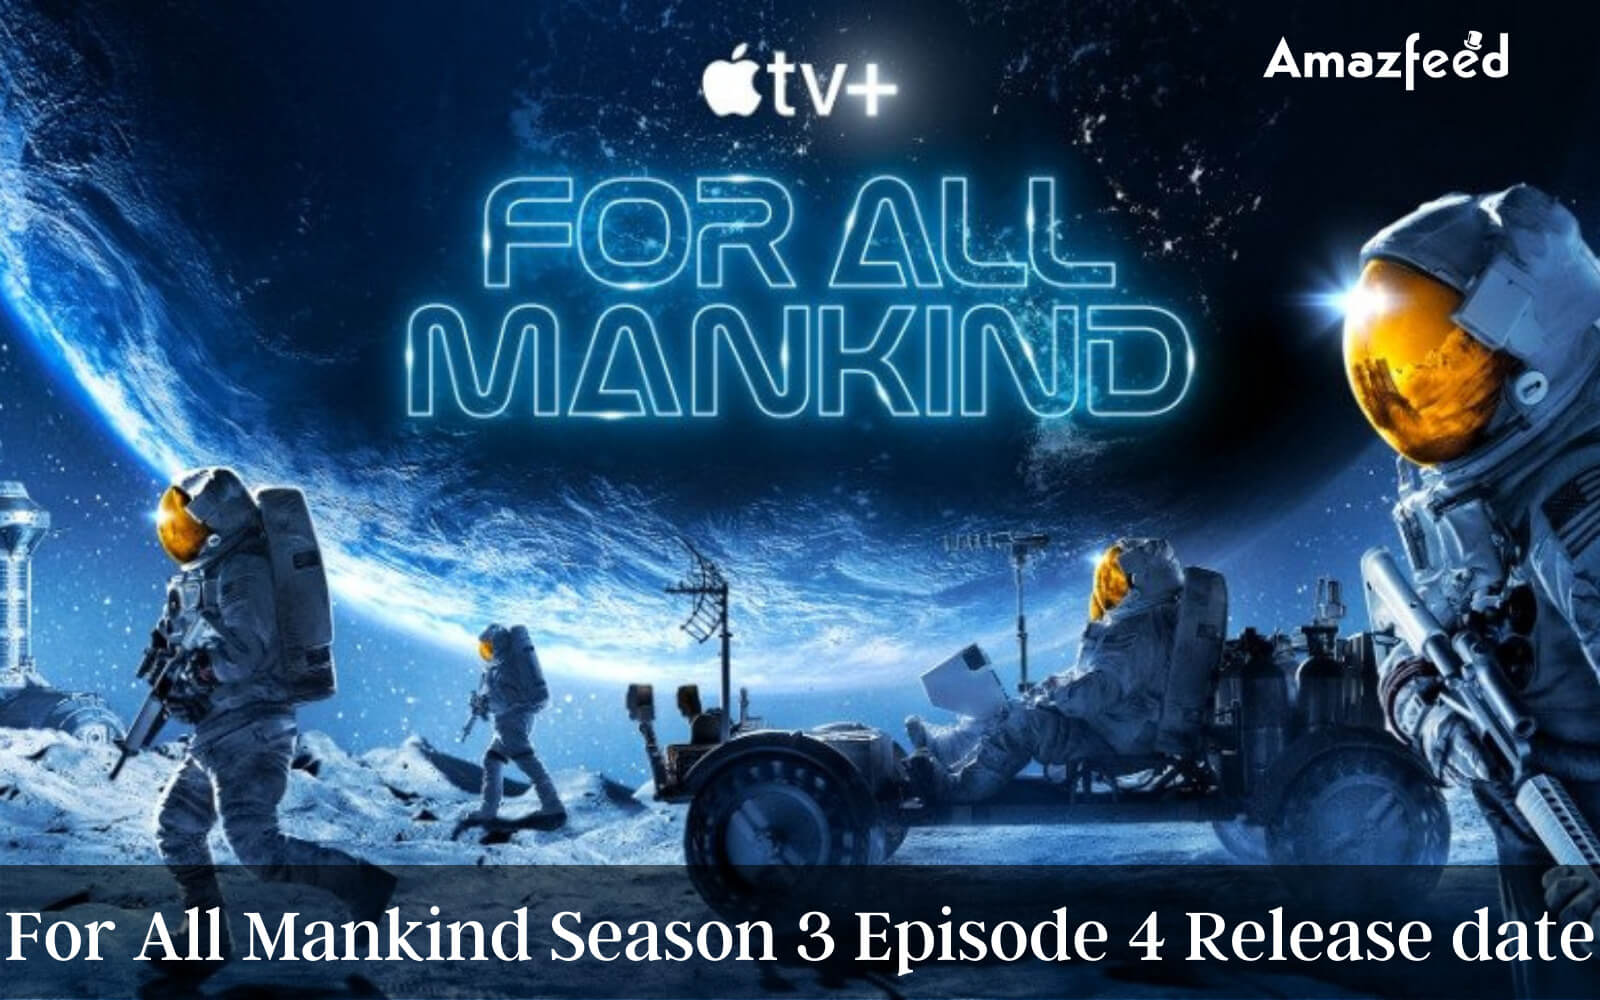 For All Mankind Season 3 Episode 4 Release date